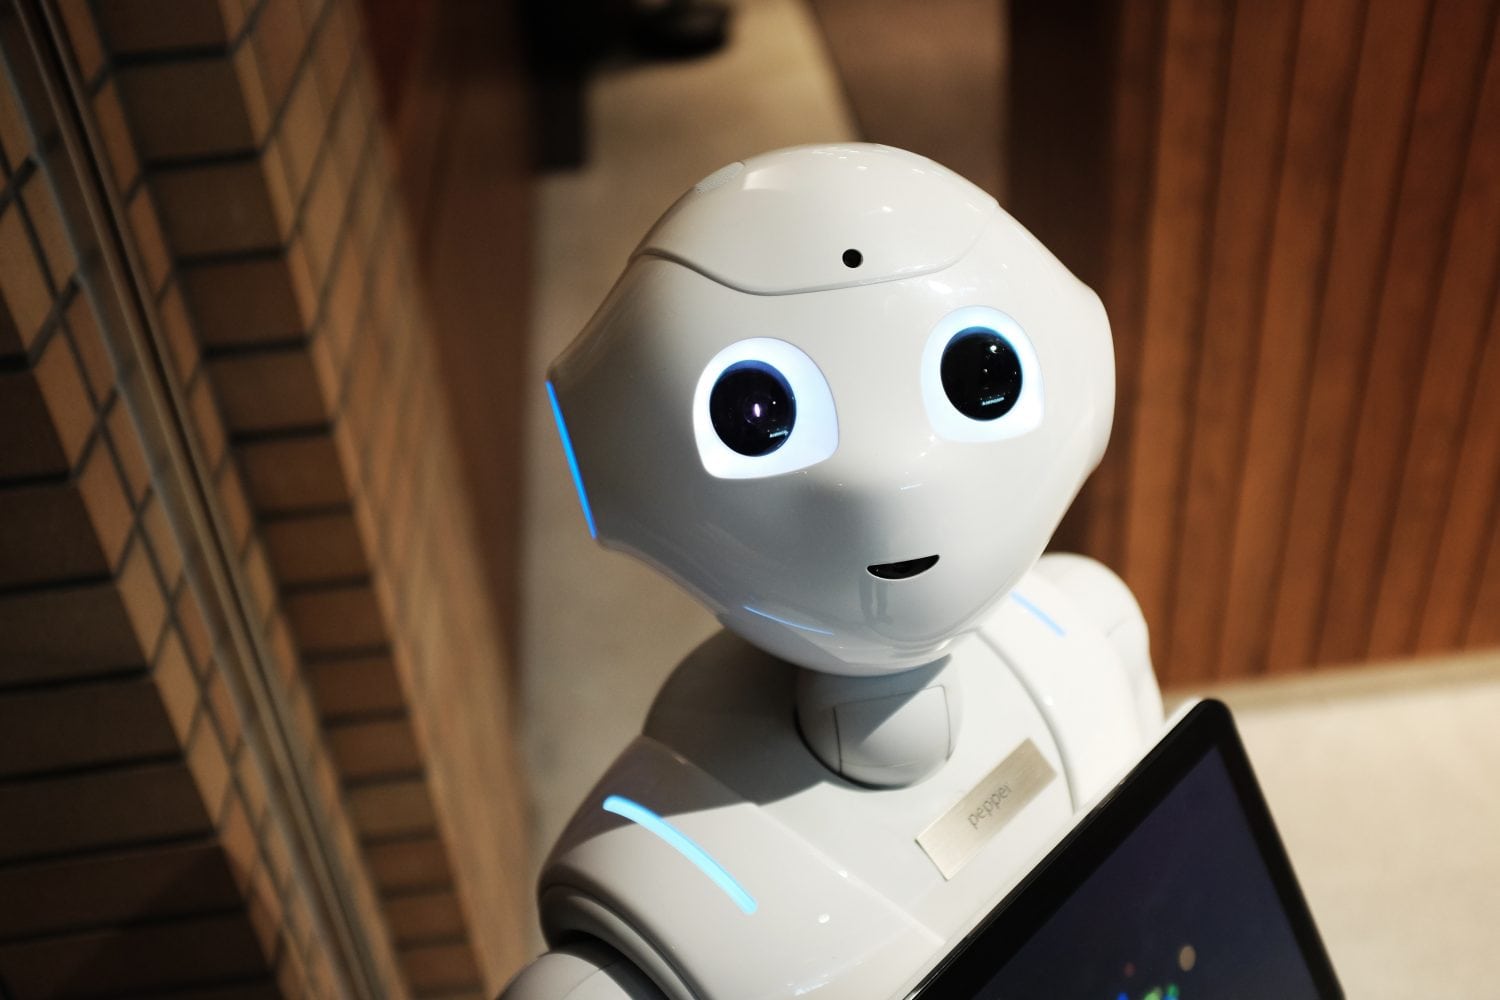 Hoteliers expect to see applications for robotic concierge services within hotel properties in the near-term.